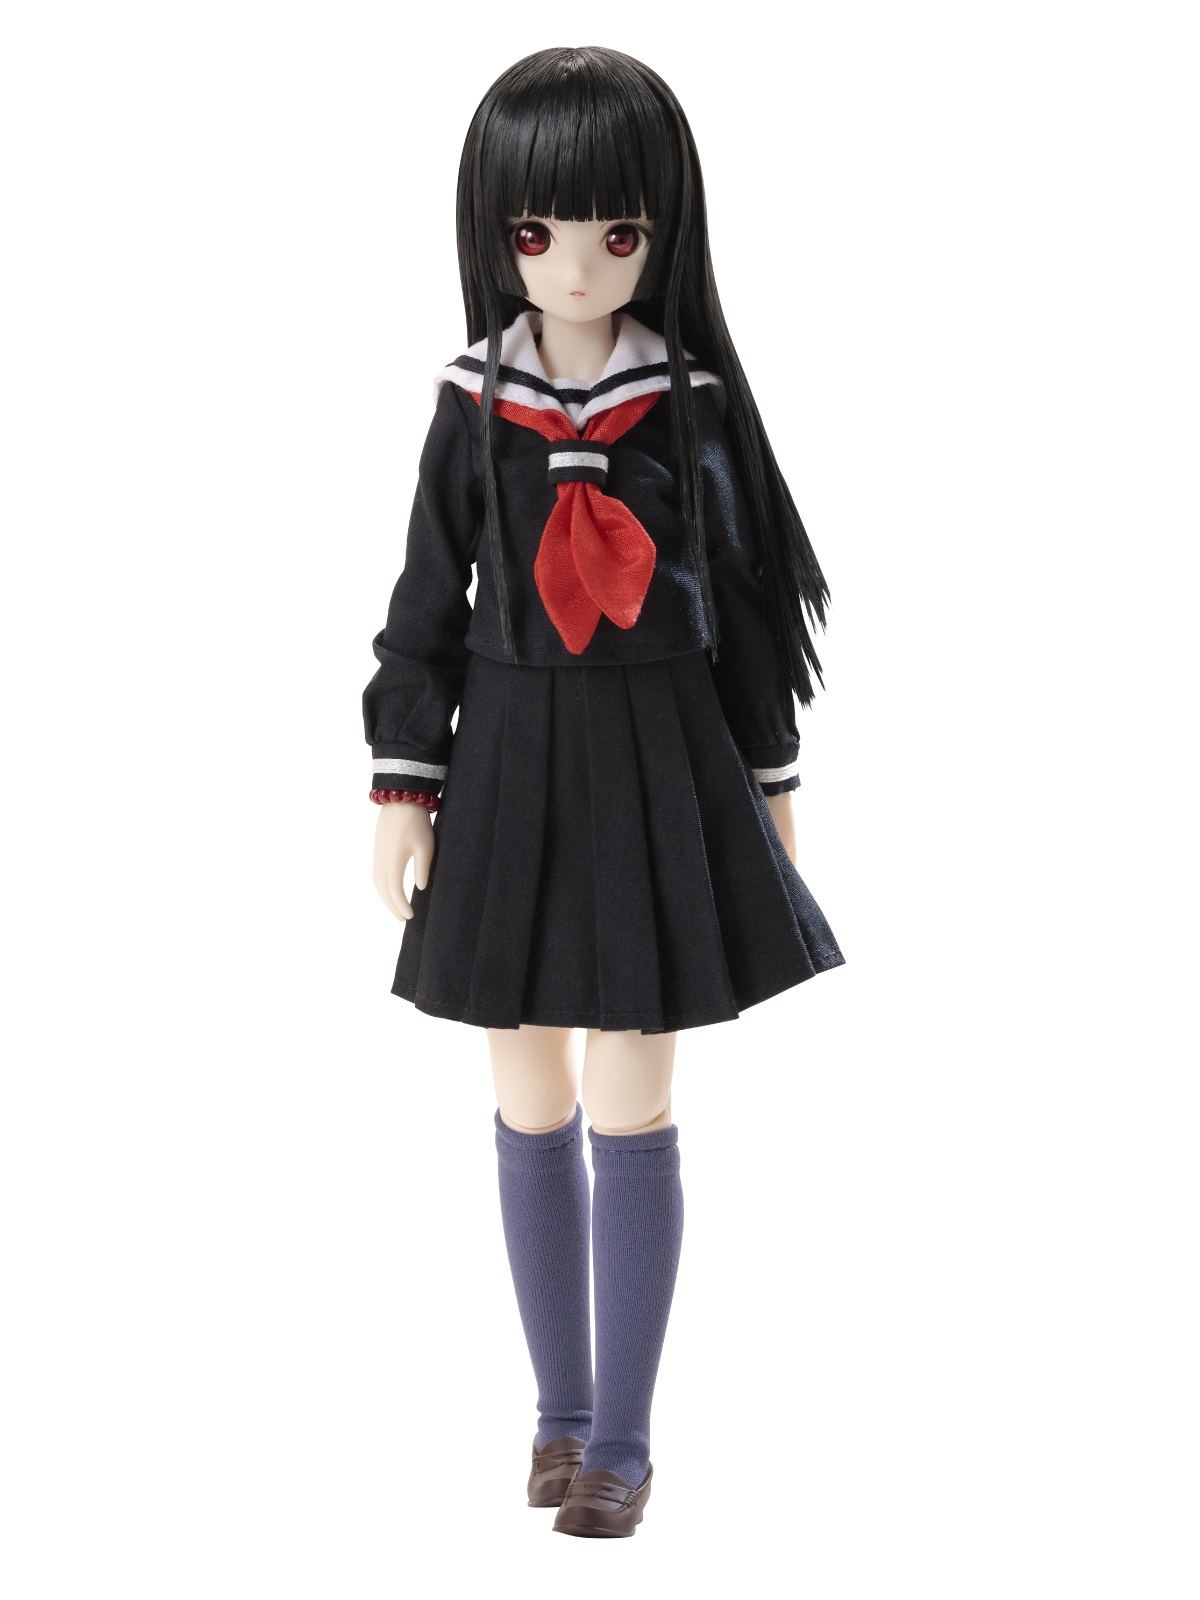 ANOTHER REALISTIC CHARACTERS NO.011 HELL GIRL THE FOURTH TWILIGHT 1/6 SCALE FASHION DOLL: AI ENMA OBITSU SCHOOL UNIFORM PROJECT COLLABORATION MODEL Azone